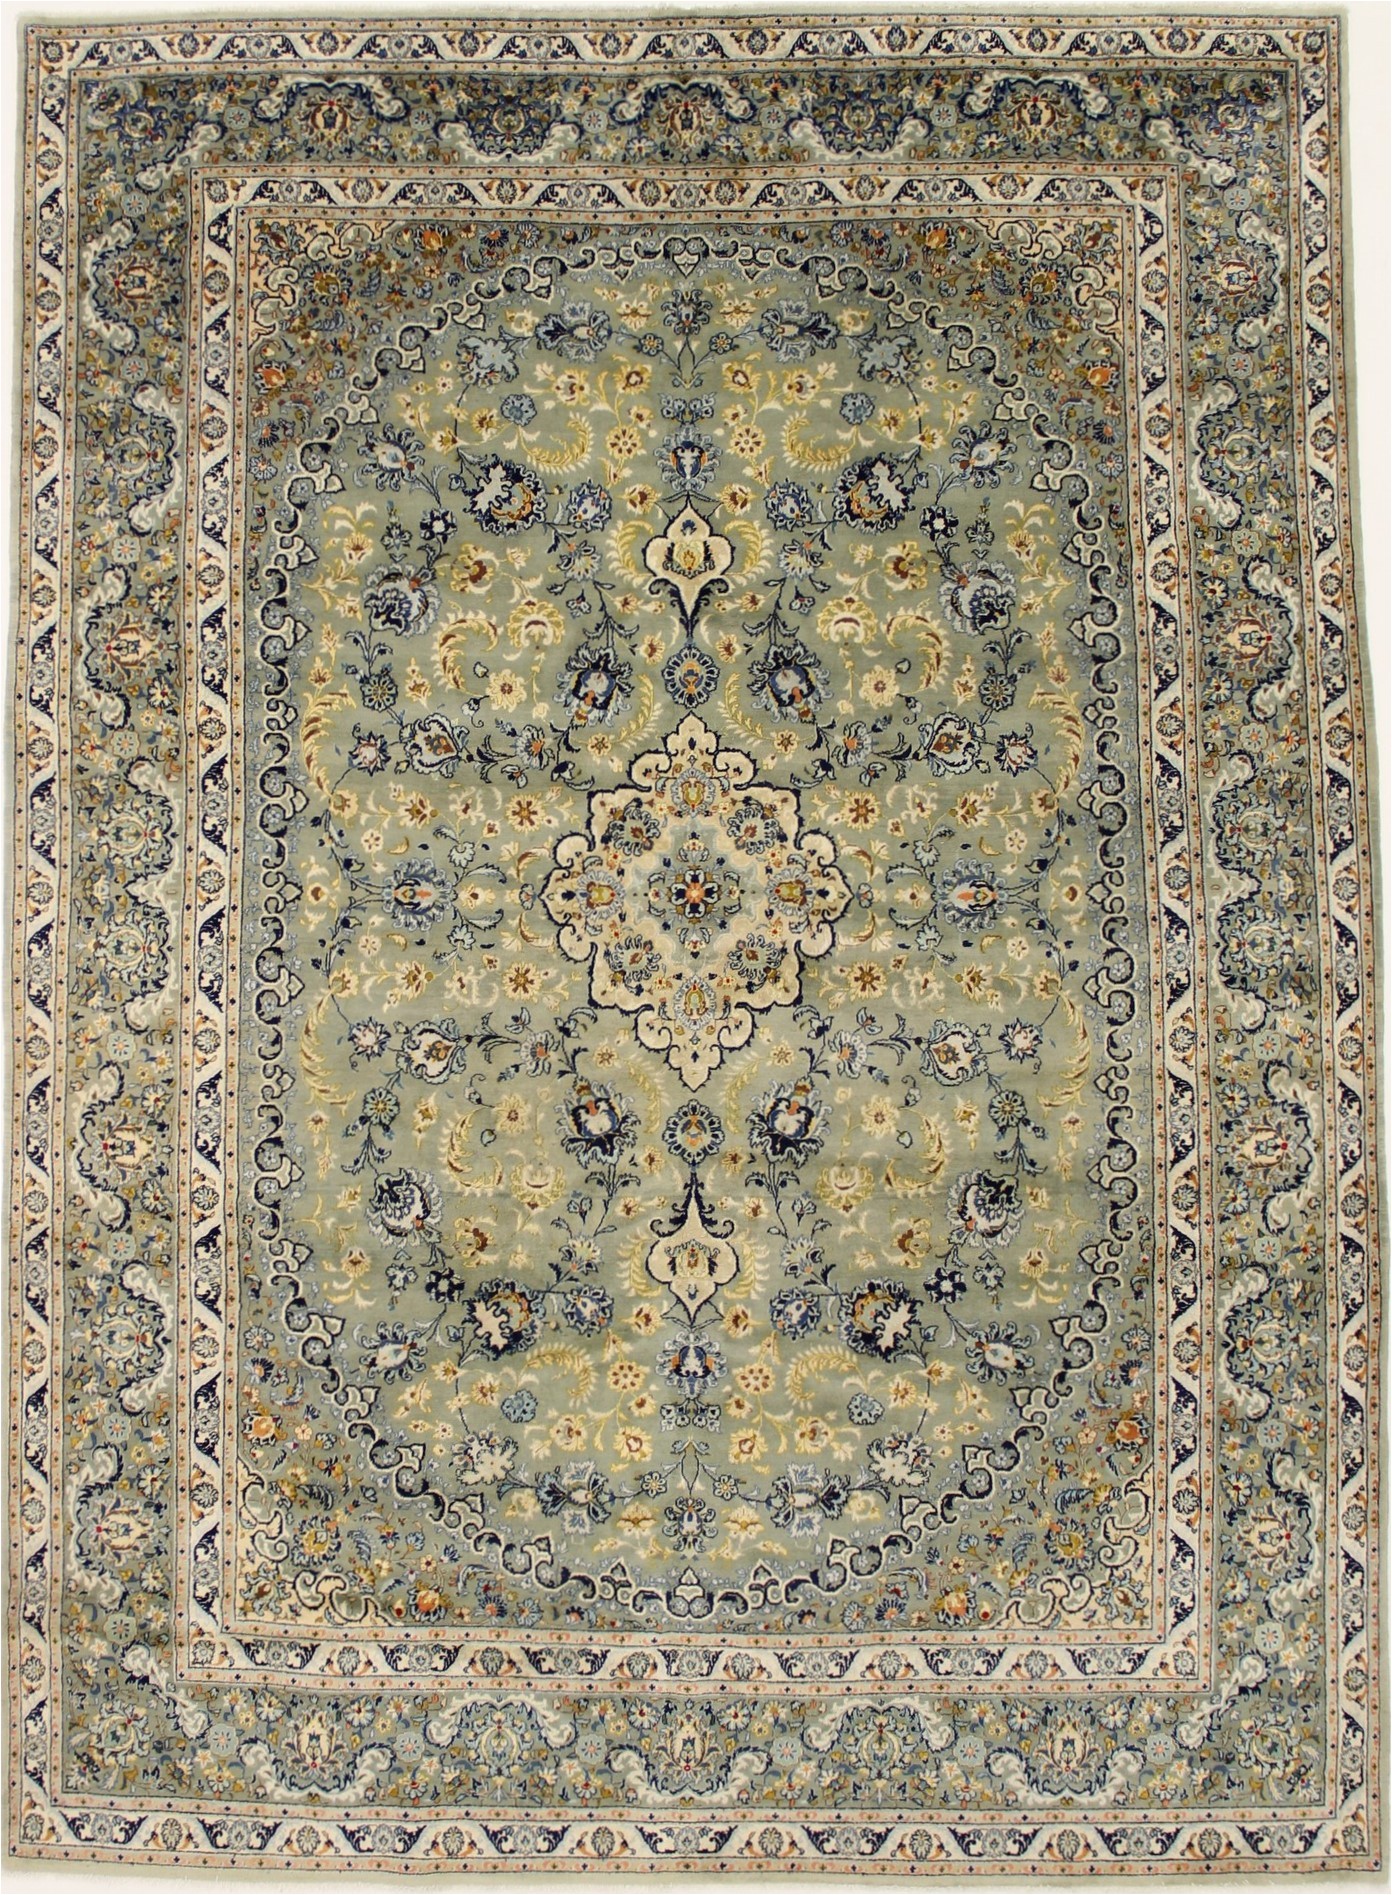 Sage Green Round area Rug Details About Sage Green Floral Traditional Classic 10×13 oriental area Rug Wool Carpet